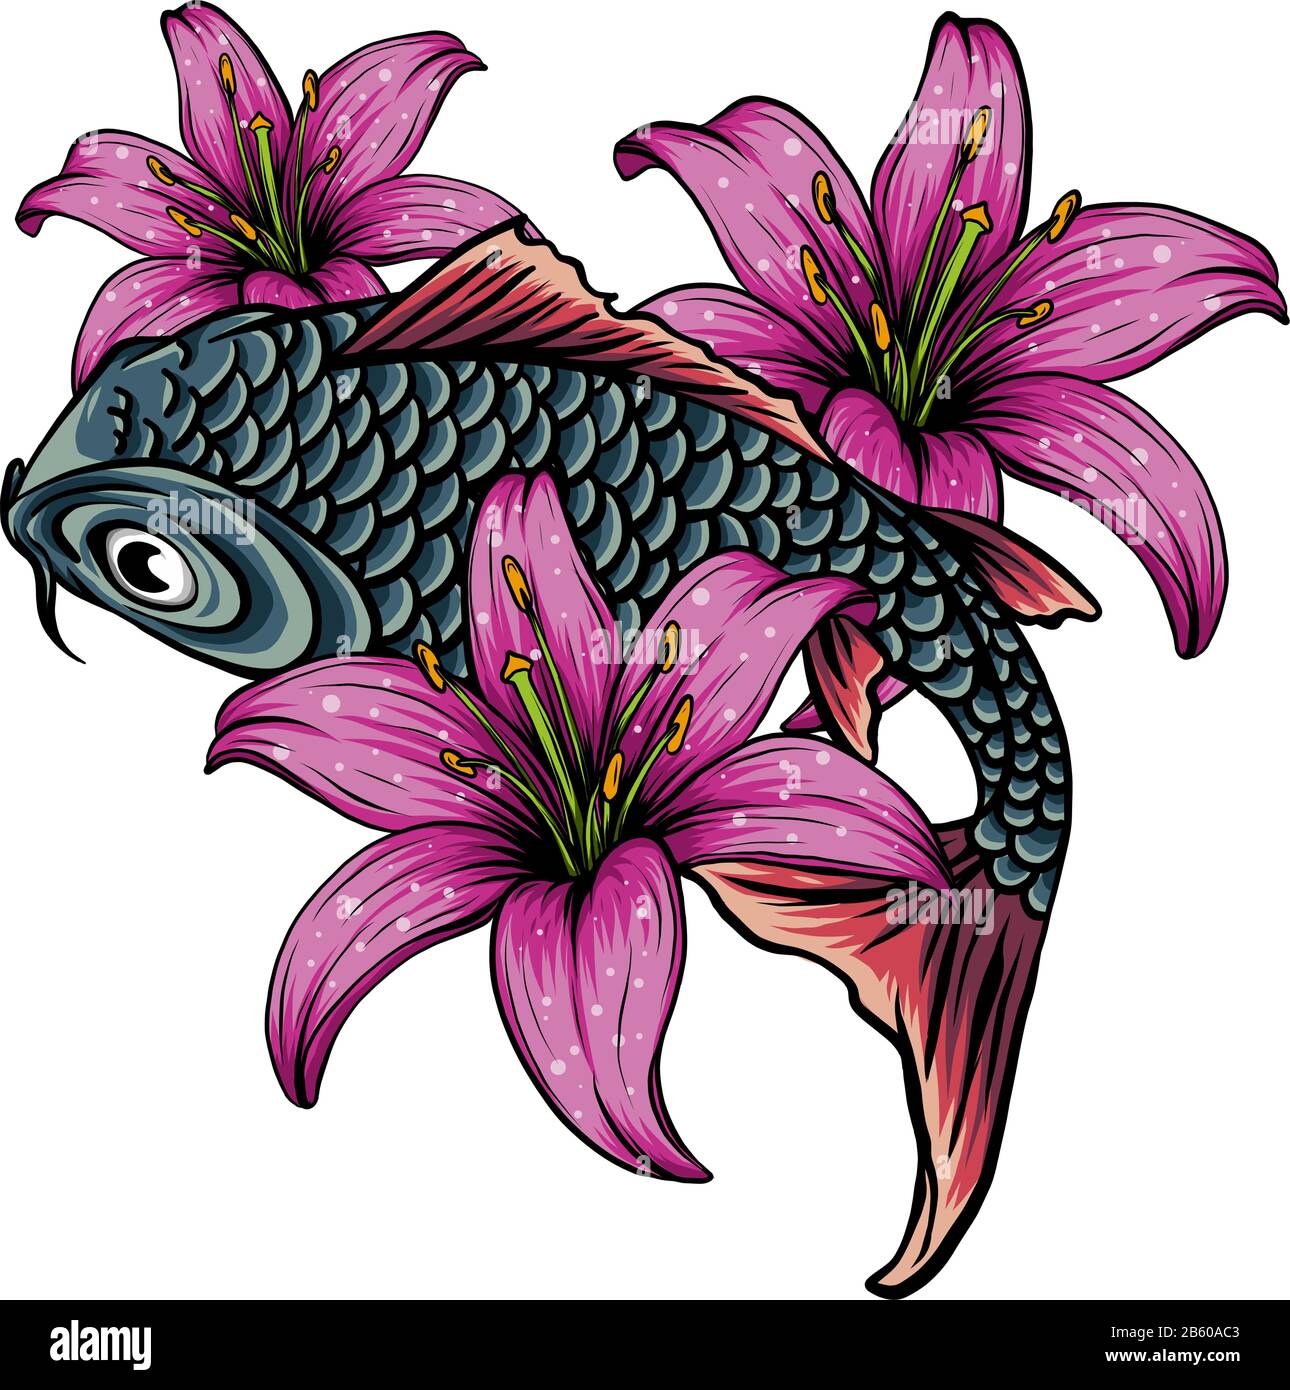 hand drawn koi fish with flower tattoo for Arm.Colorful Koi carp with Water splash Stock Vector